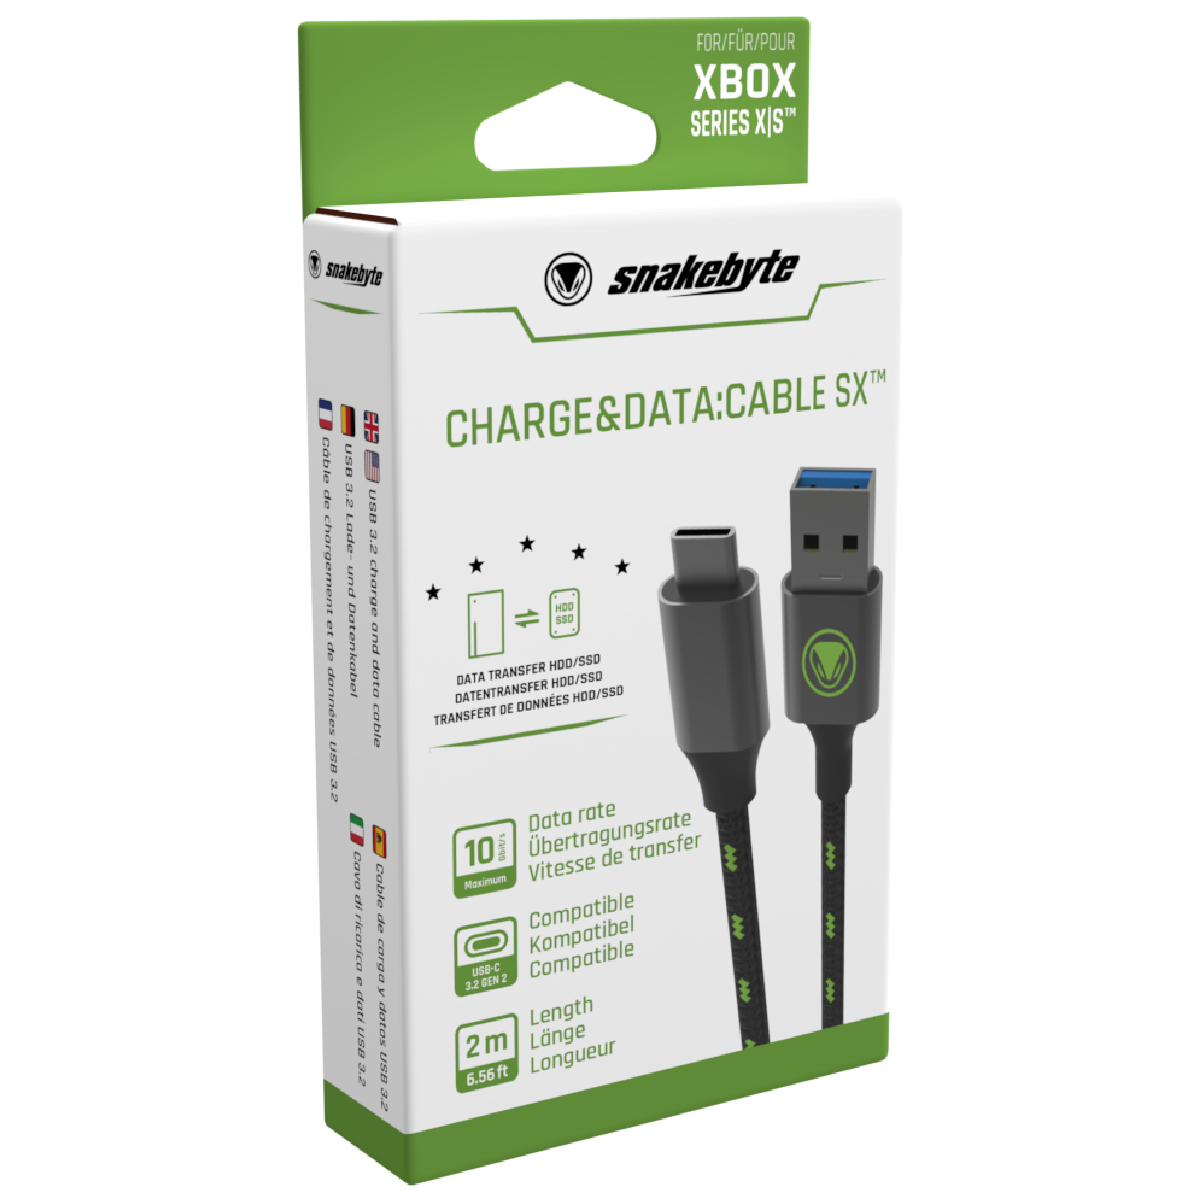 CHARGE&DATA:CABLE SX